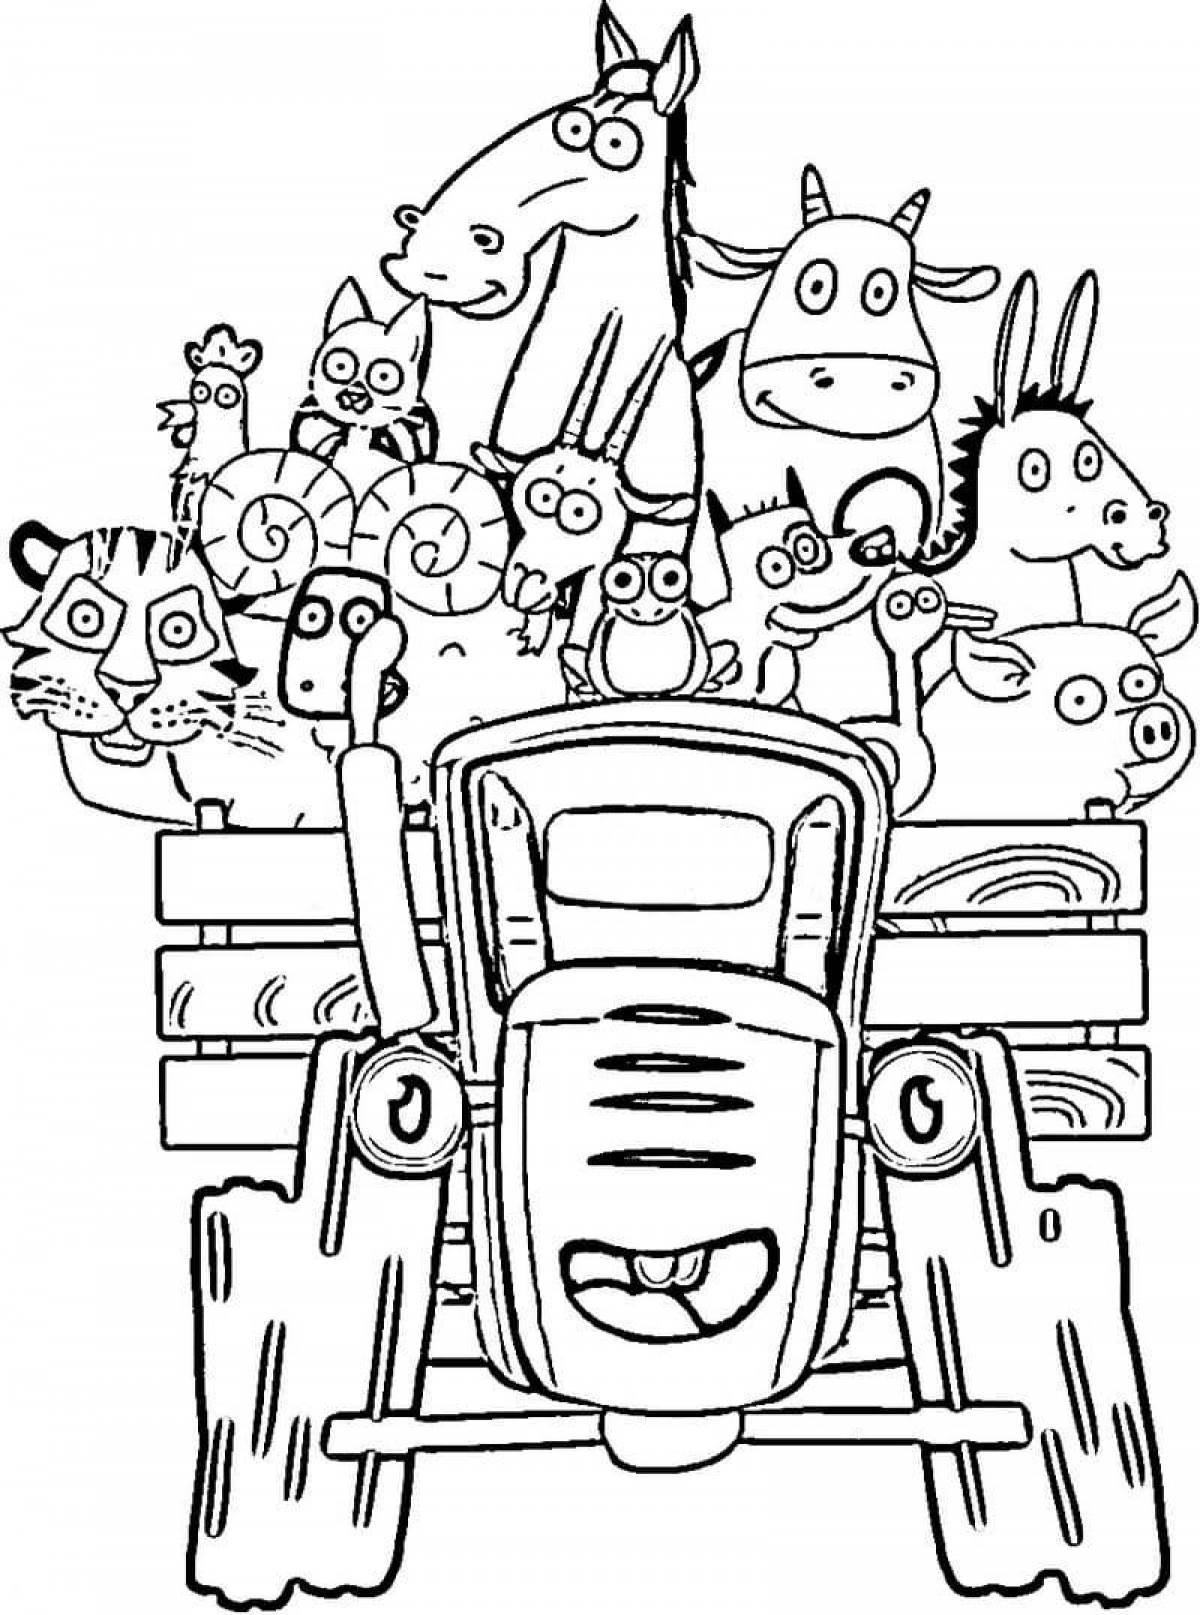 Joyful blue tractor coloring book for kids